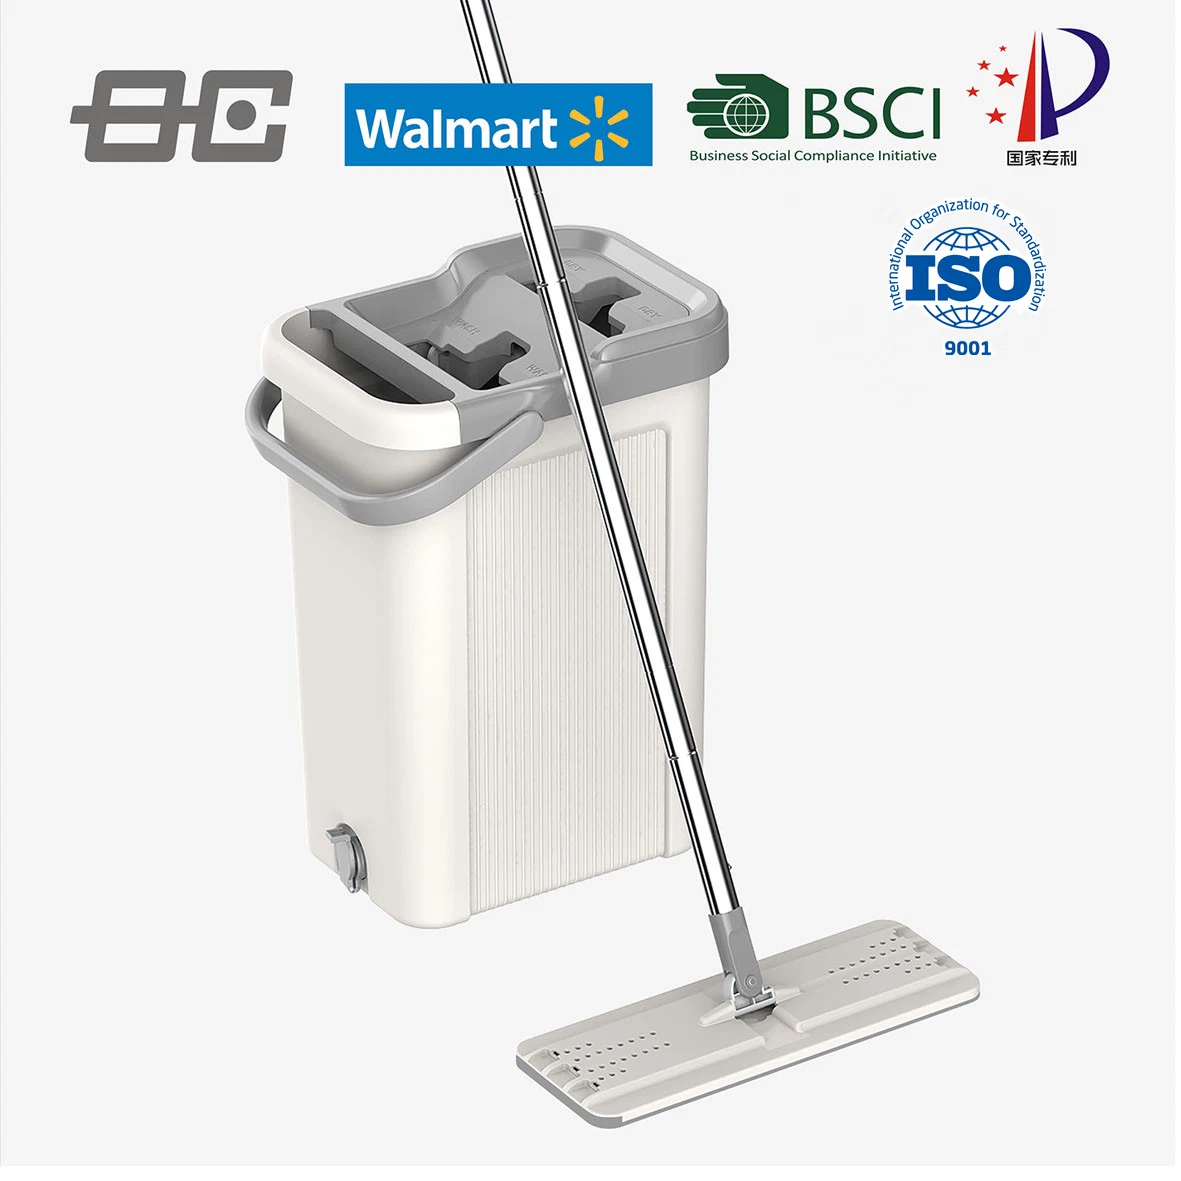 Bosheng Mop and Bucket with Wringer Set, Hands Free Flat Floor Mop and Bucket, Washable Microfiber Pads Included, Wet and Dry Use, Home Floor Cleaning System